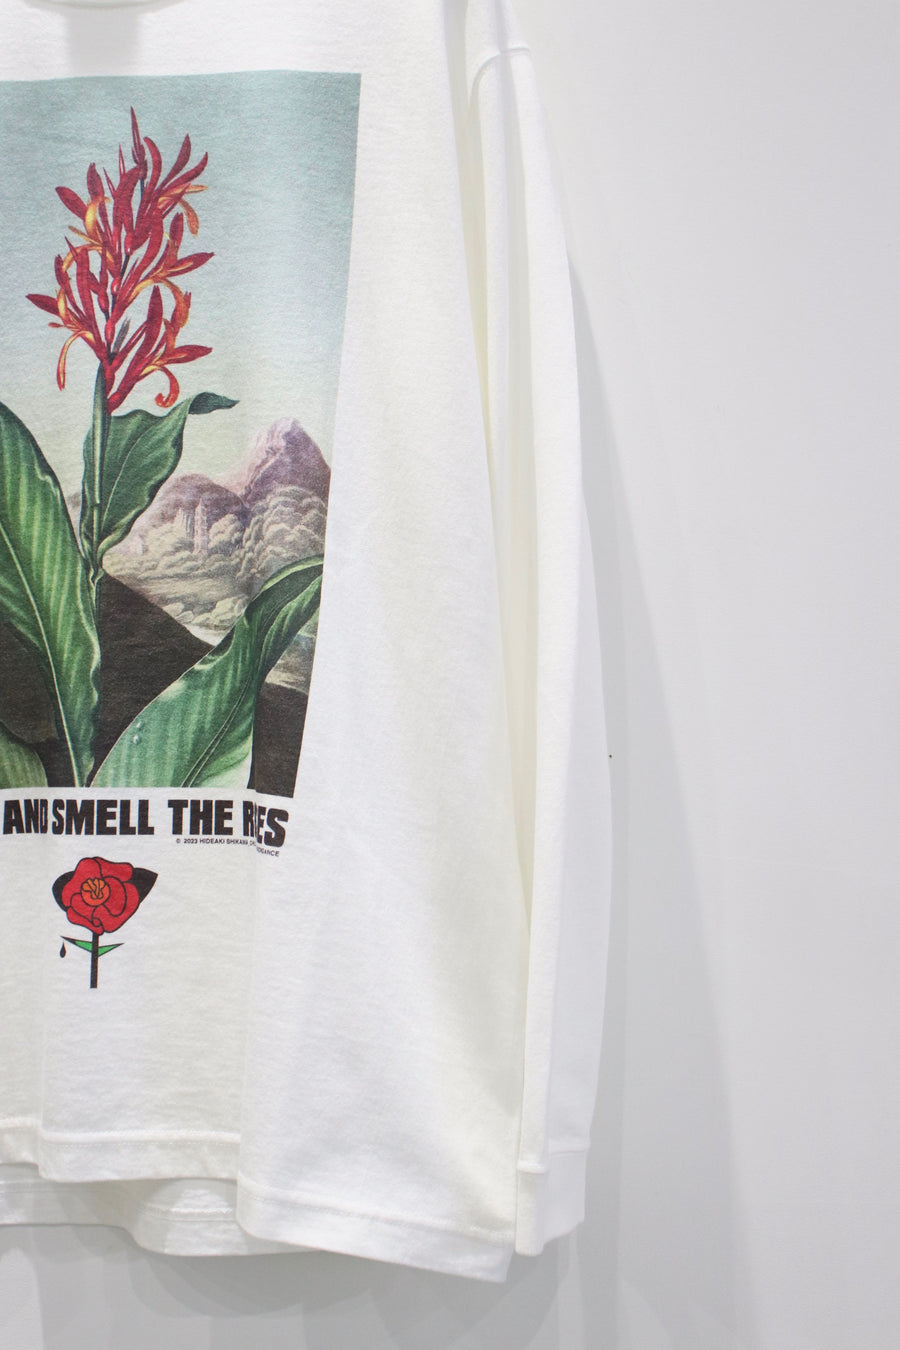 Children of the discordance  STOP AND SMELL THE ROSES TEE A LS